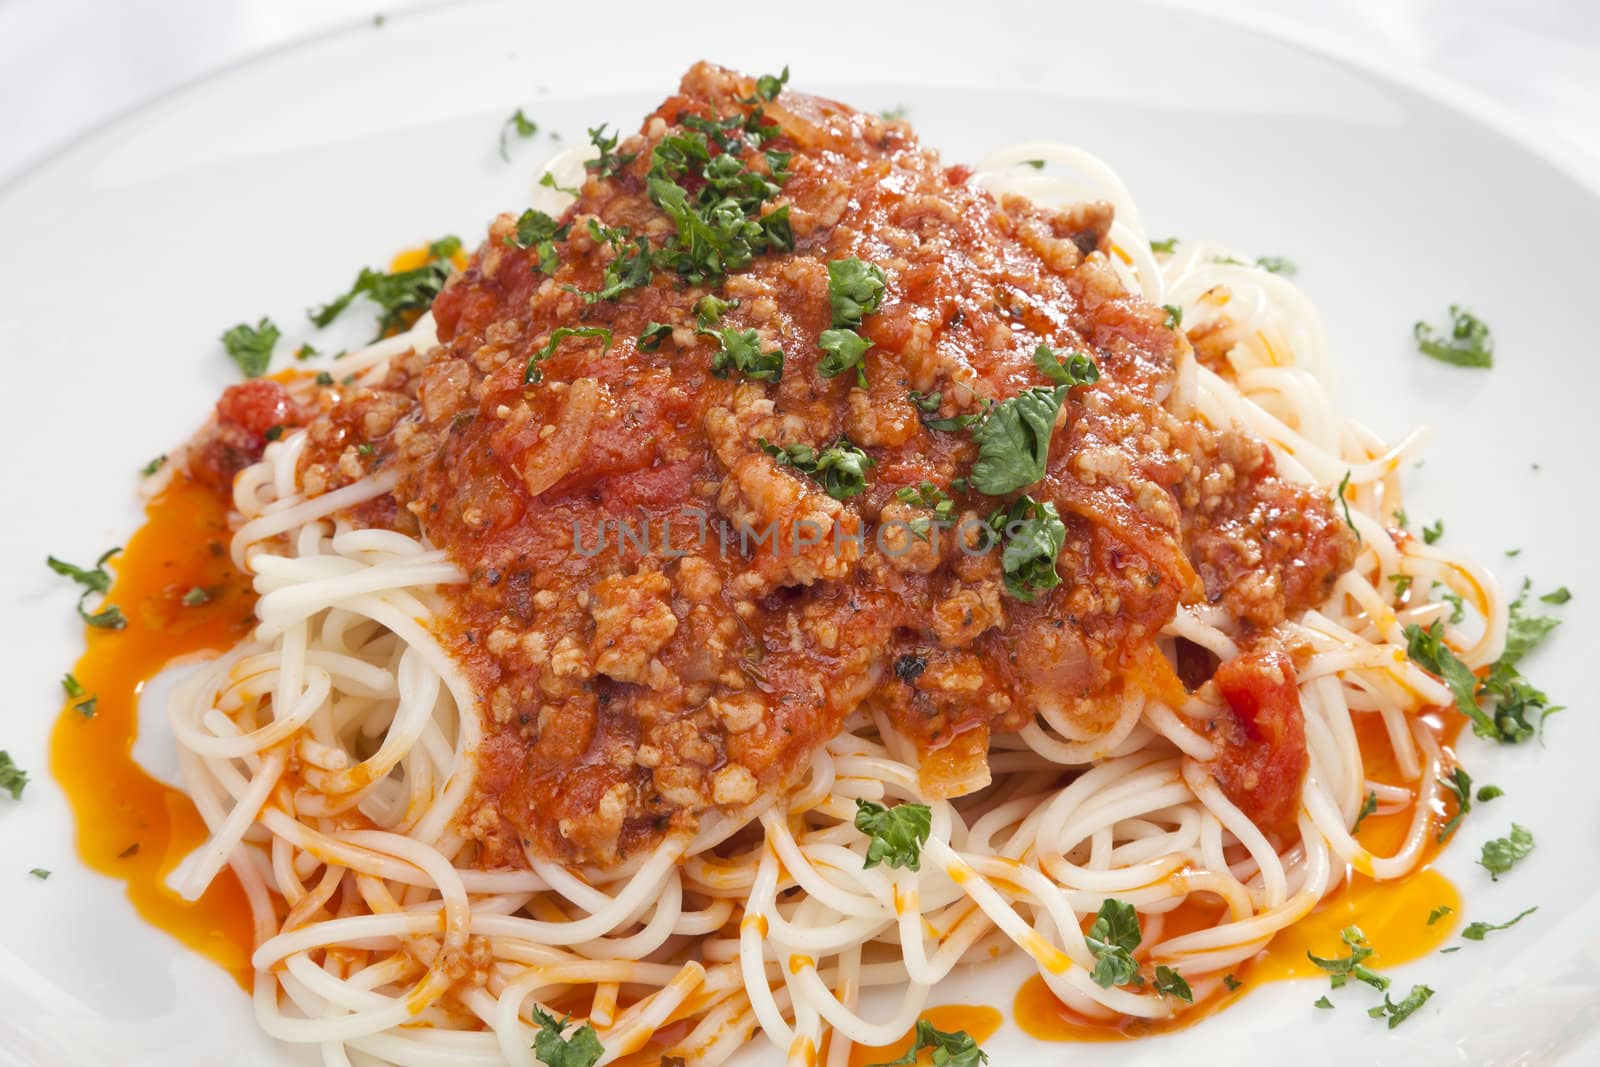 Spagetti Bolognese by hanusst